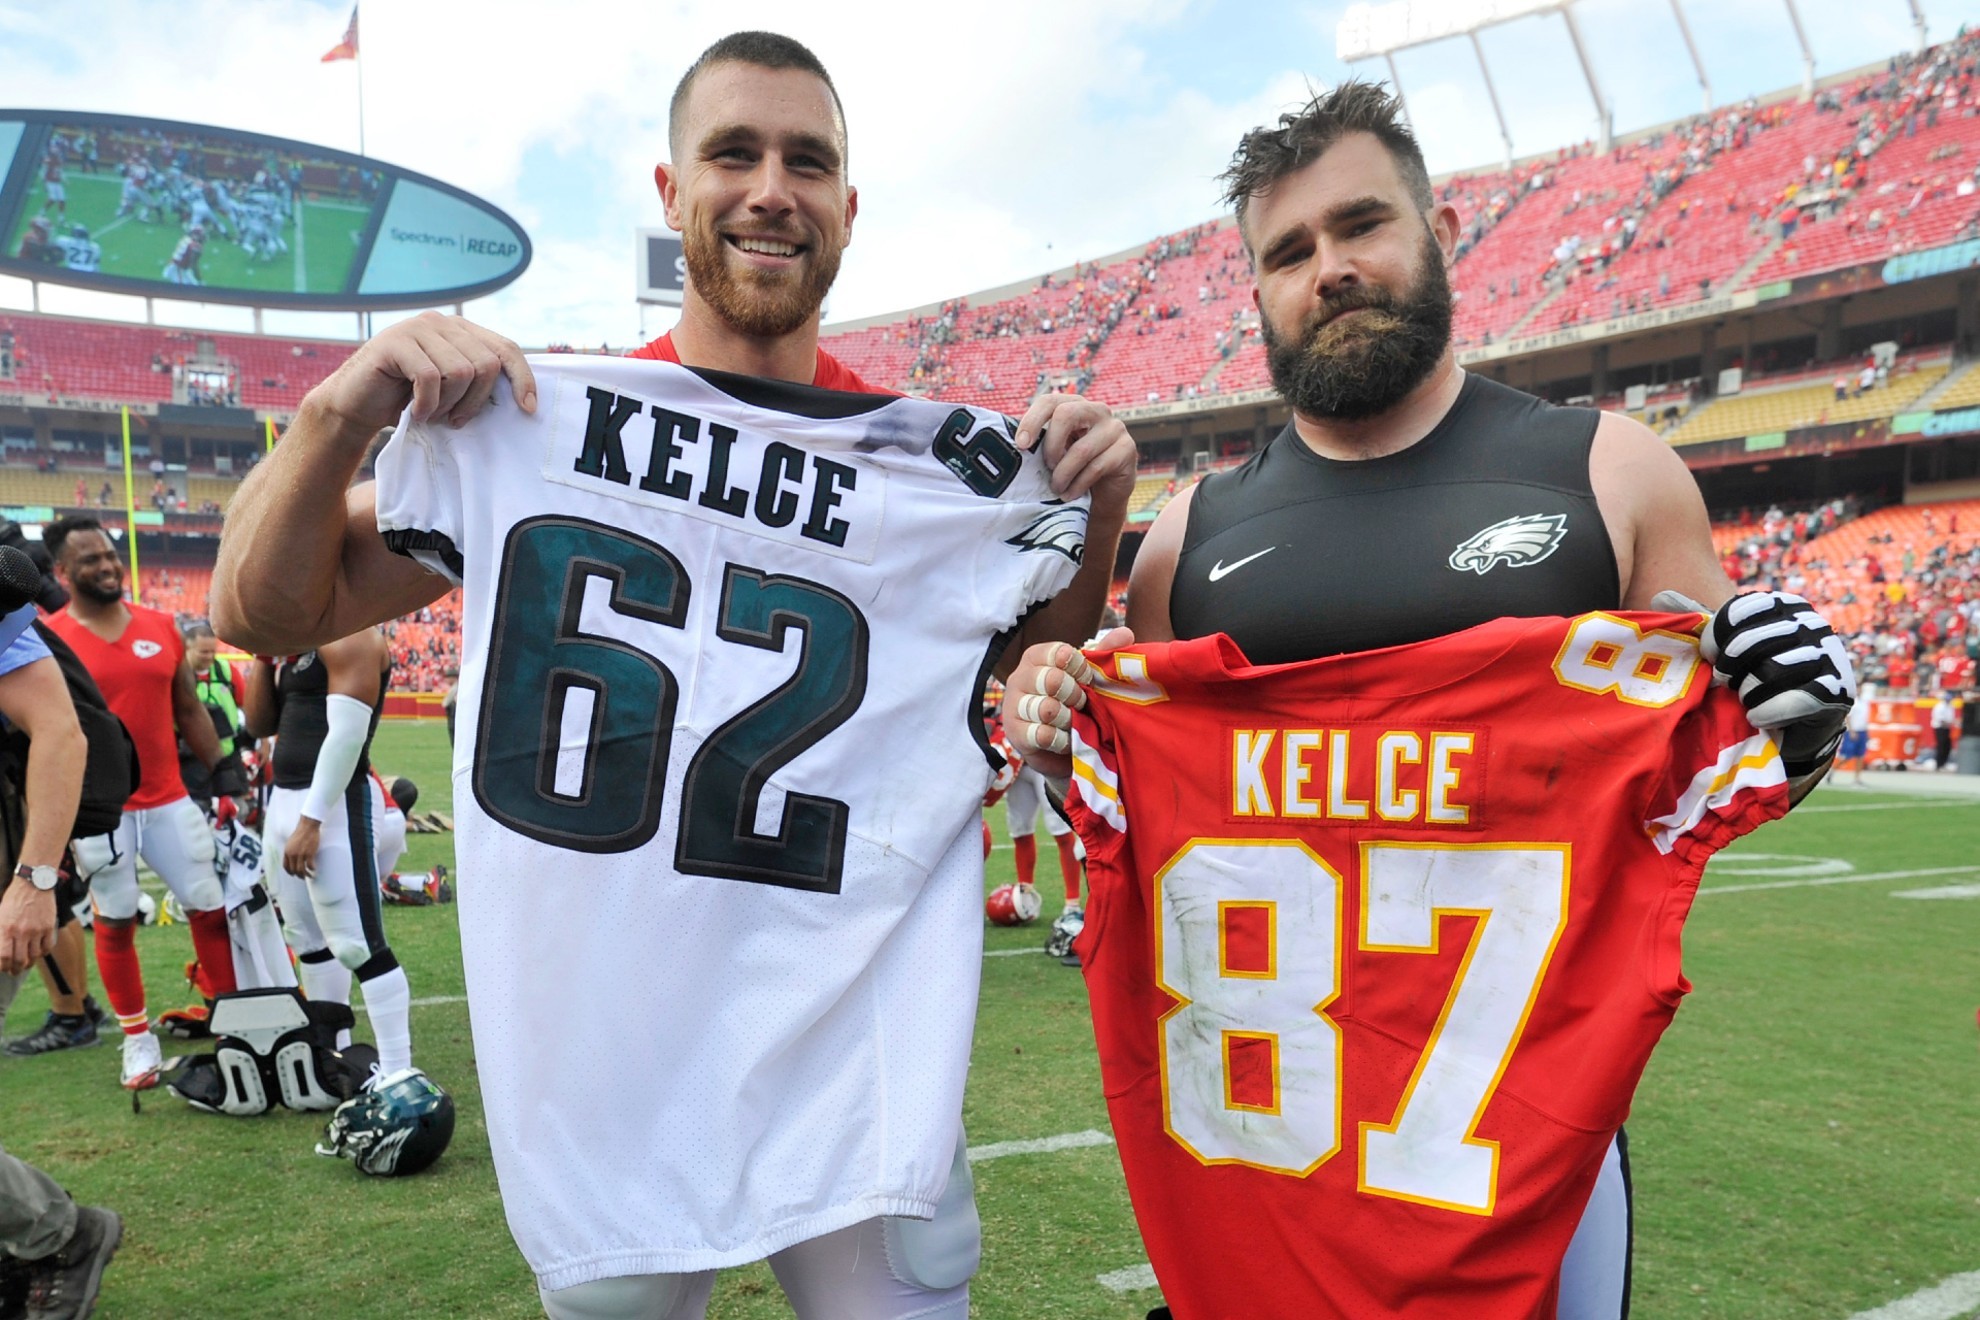 Travis Kelce and his brother Jason Kelce exchange jerseys following an NFL